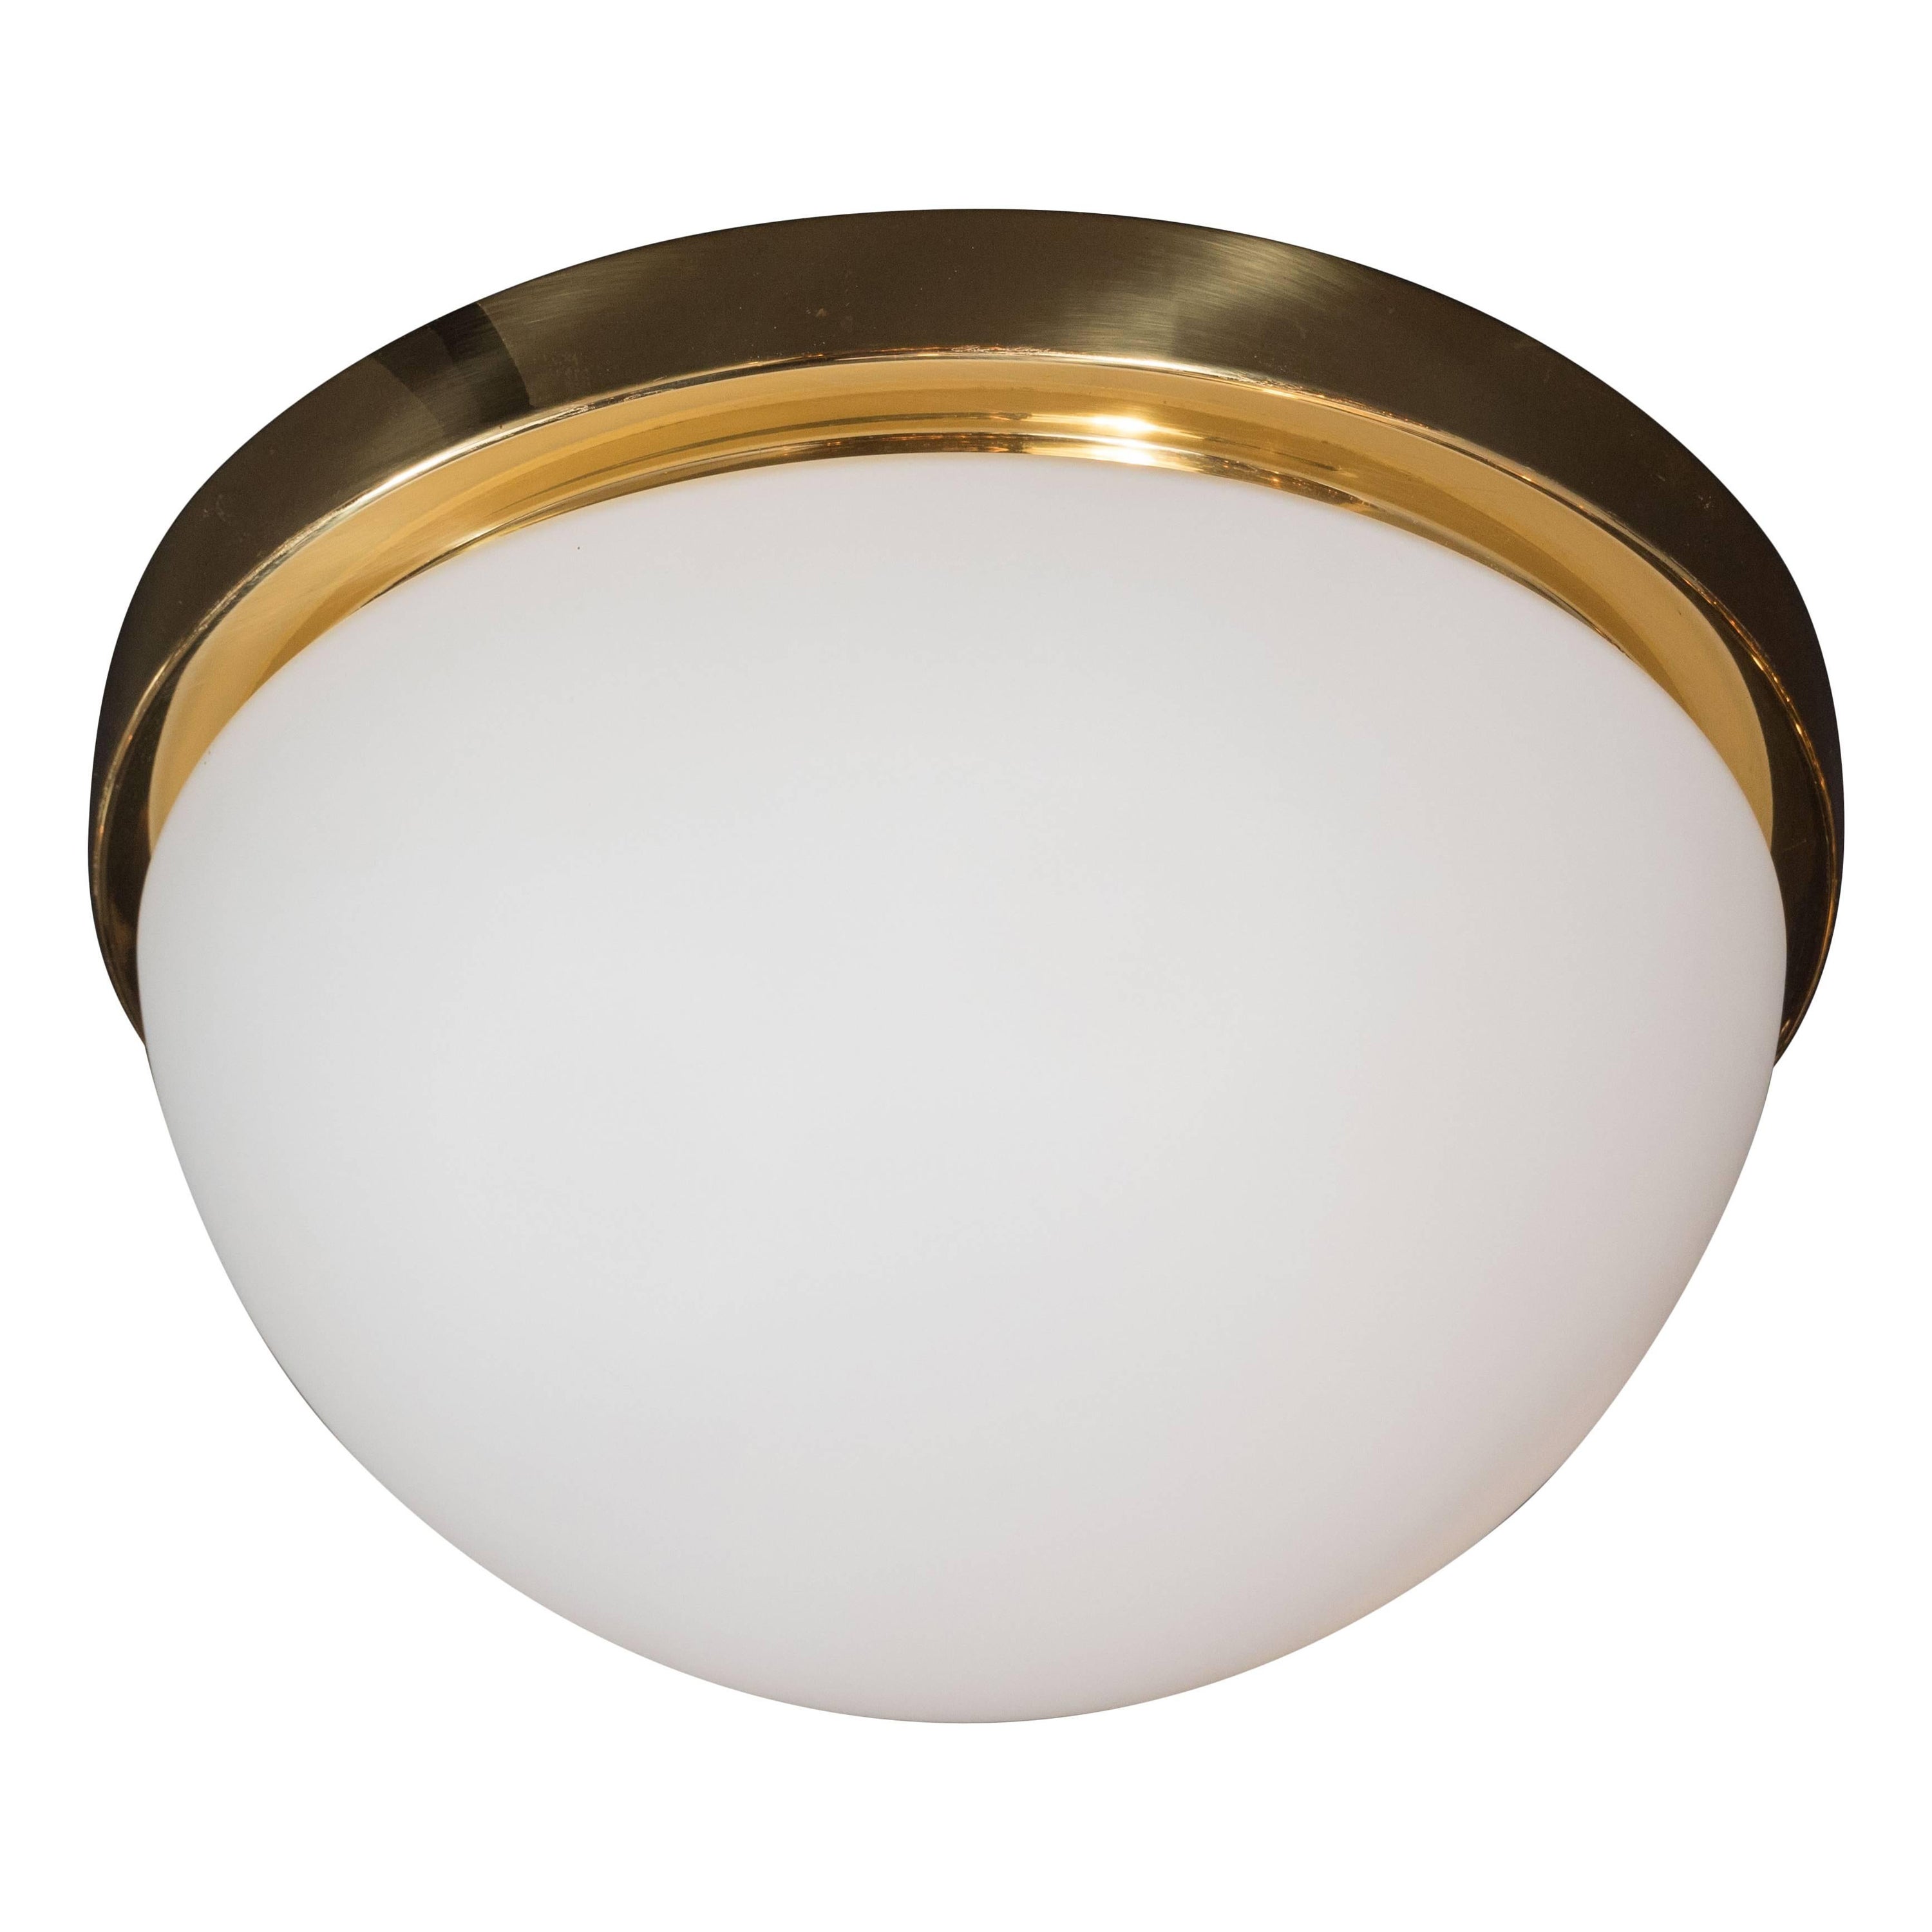 Midcentury Frosted Glass and Brass Flush Mount Fixture by Glashütte Limburg For Sale